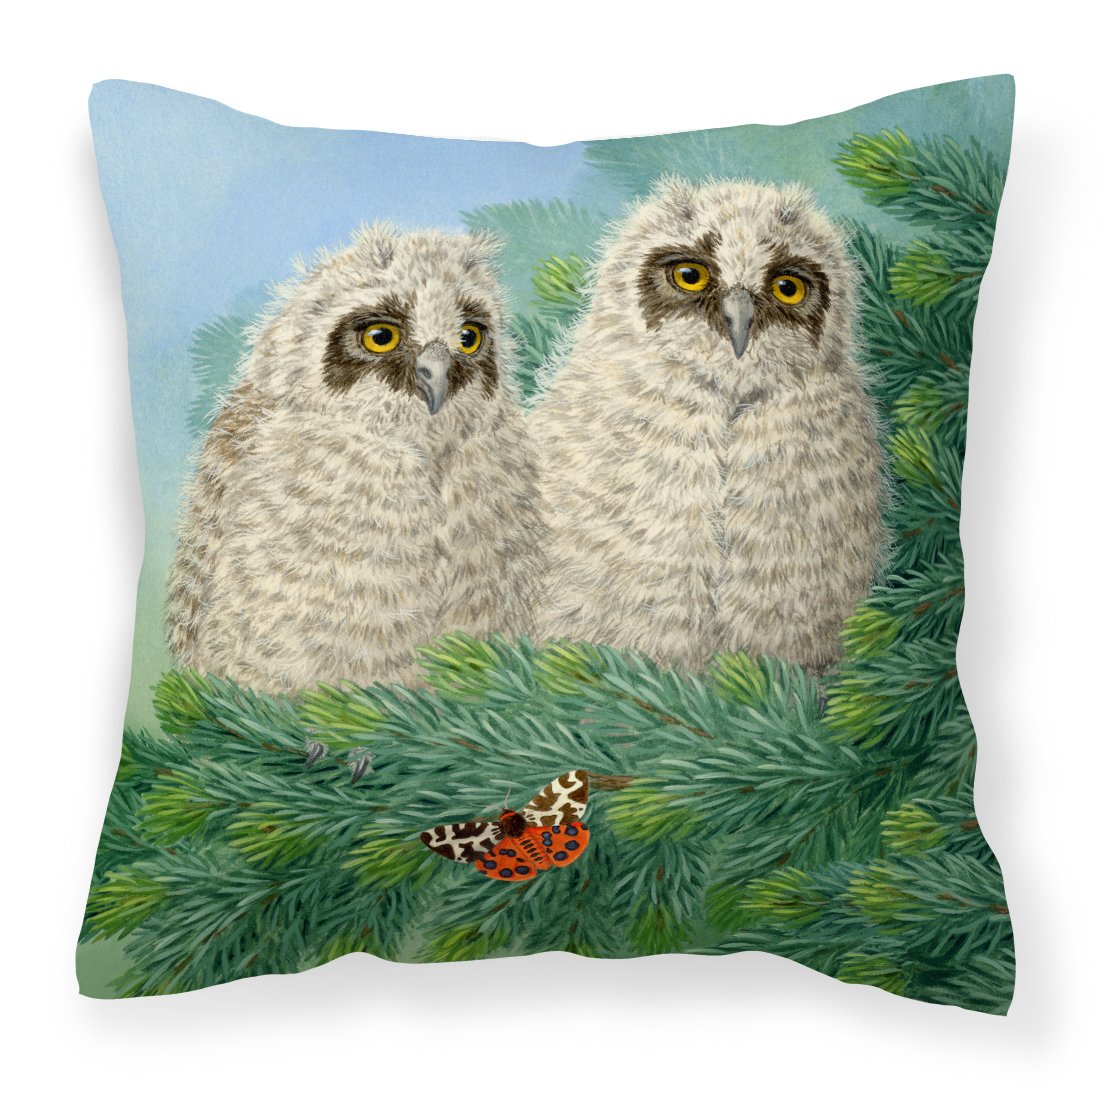 Owlets and Butterfly by Sarah Adams Canvas Decorative Pillow by Caroline's Treasures